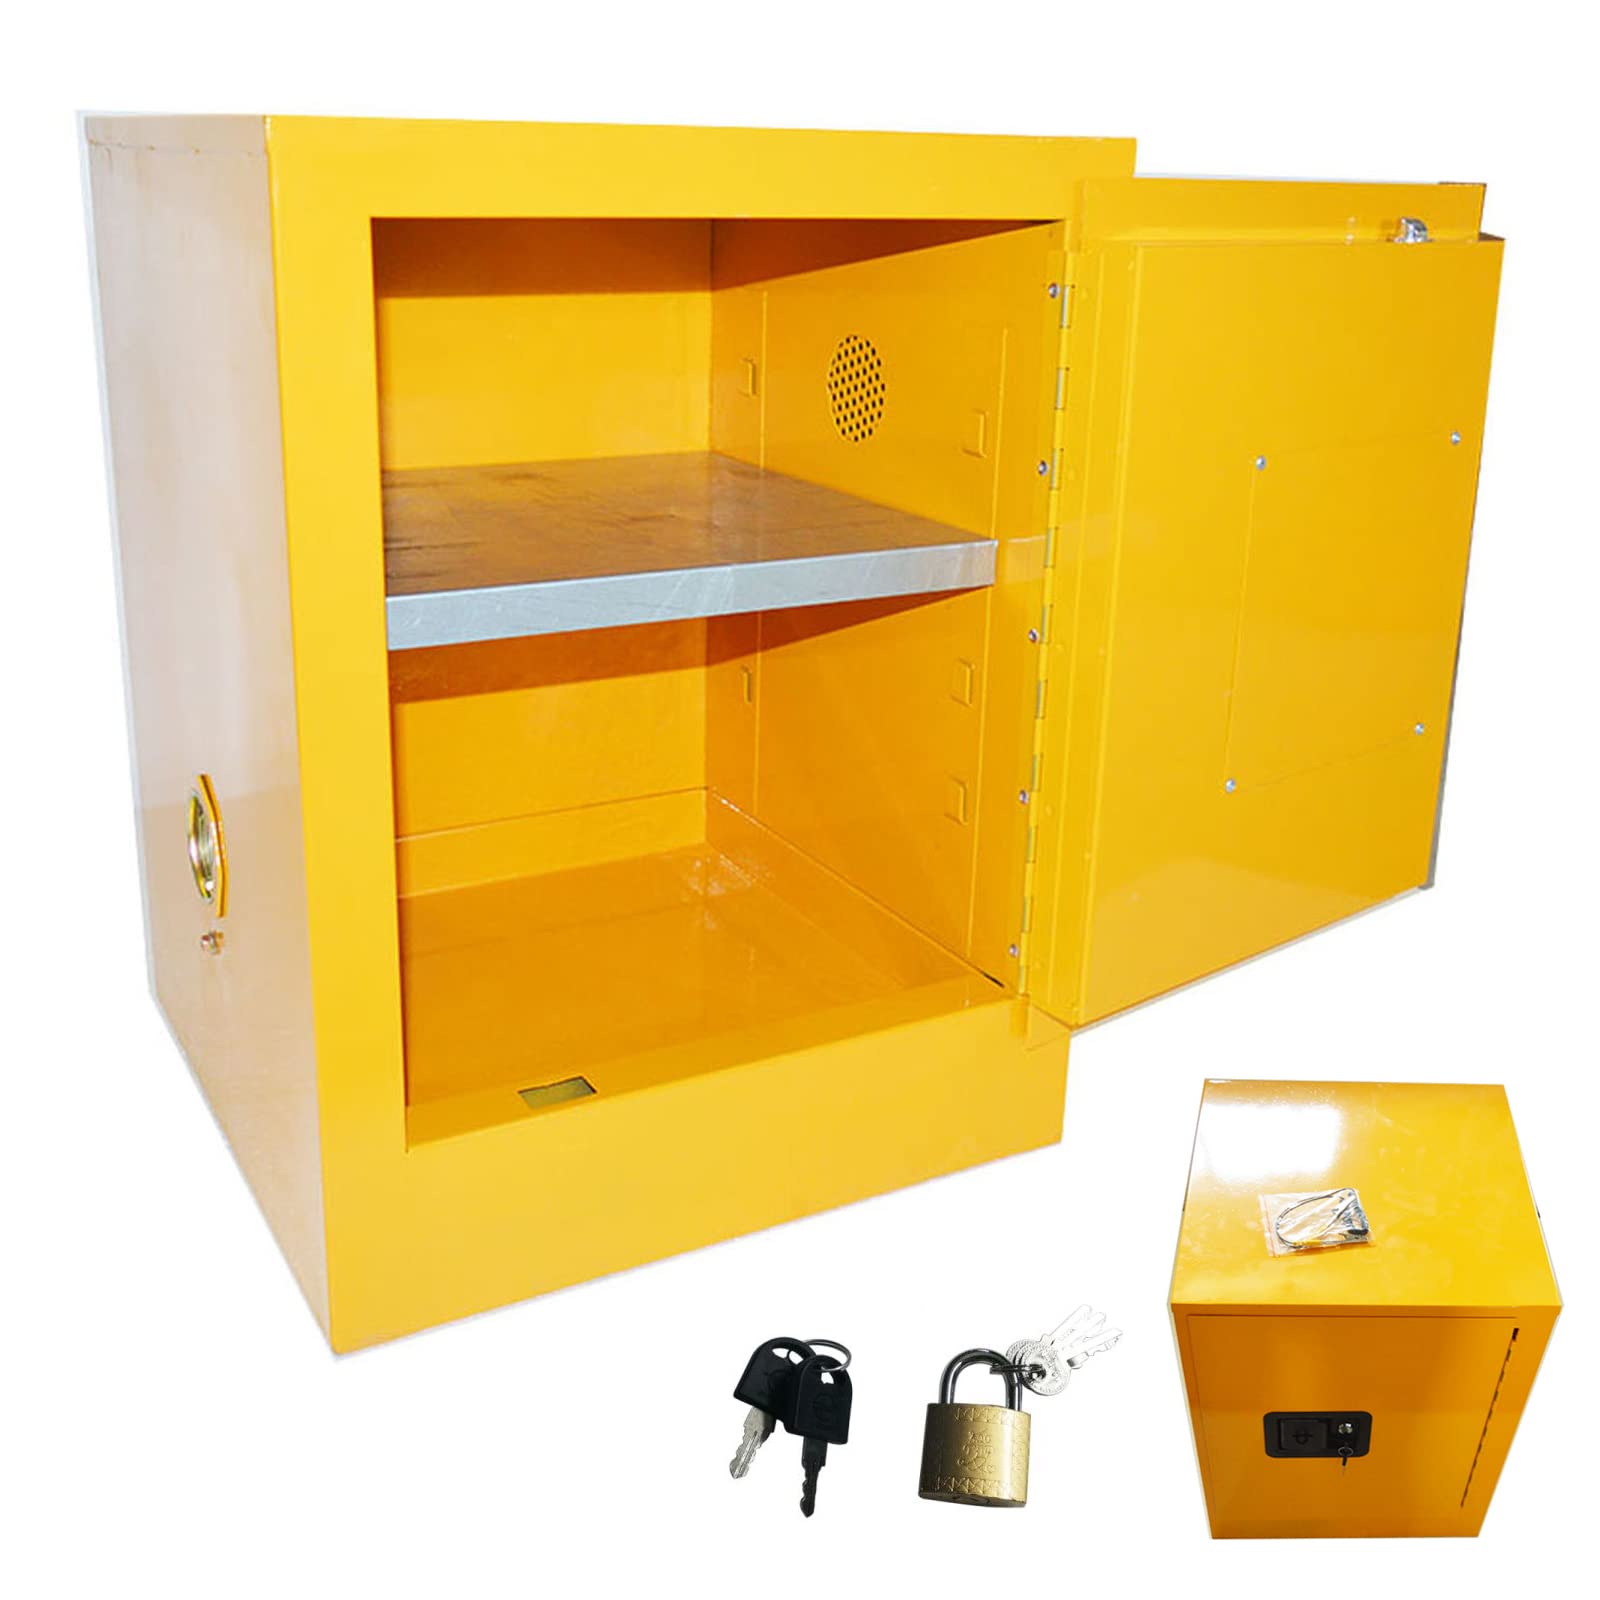 Safety cabinet and structure